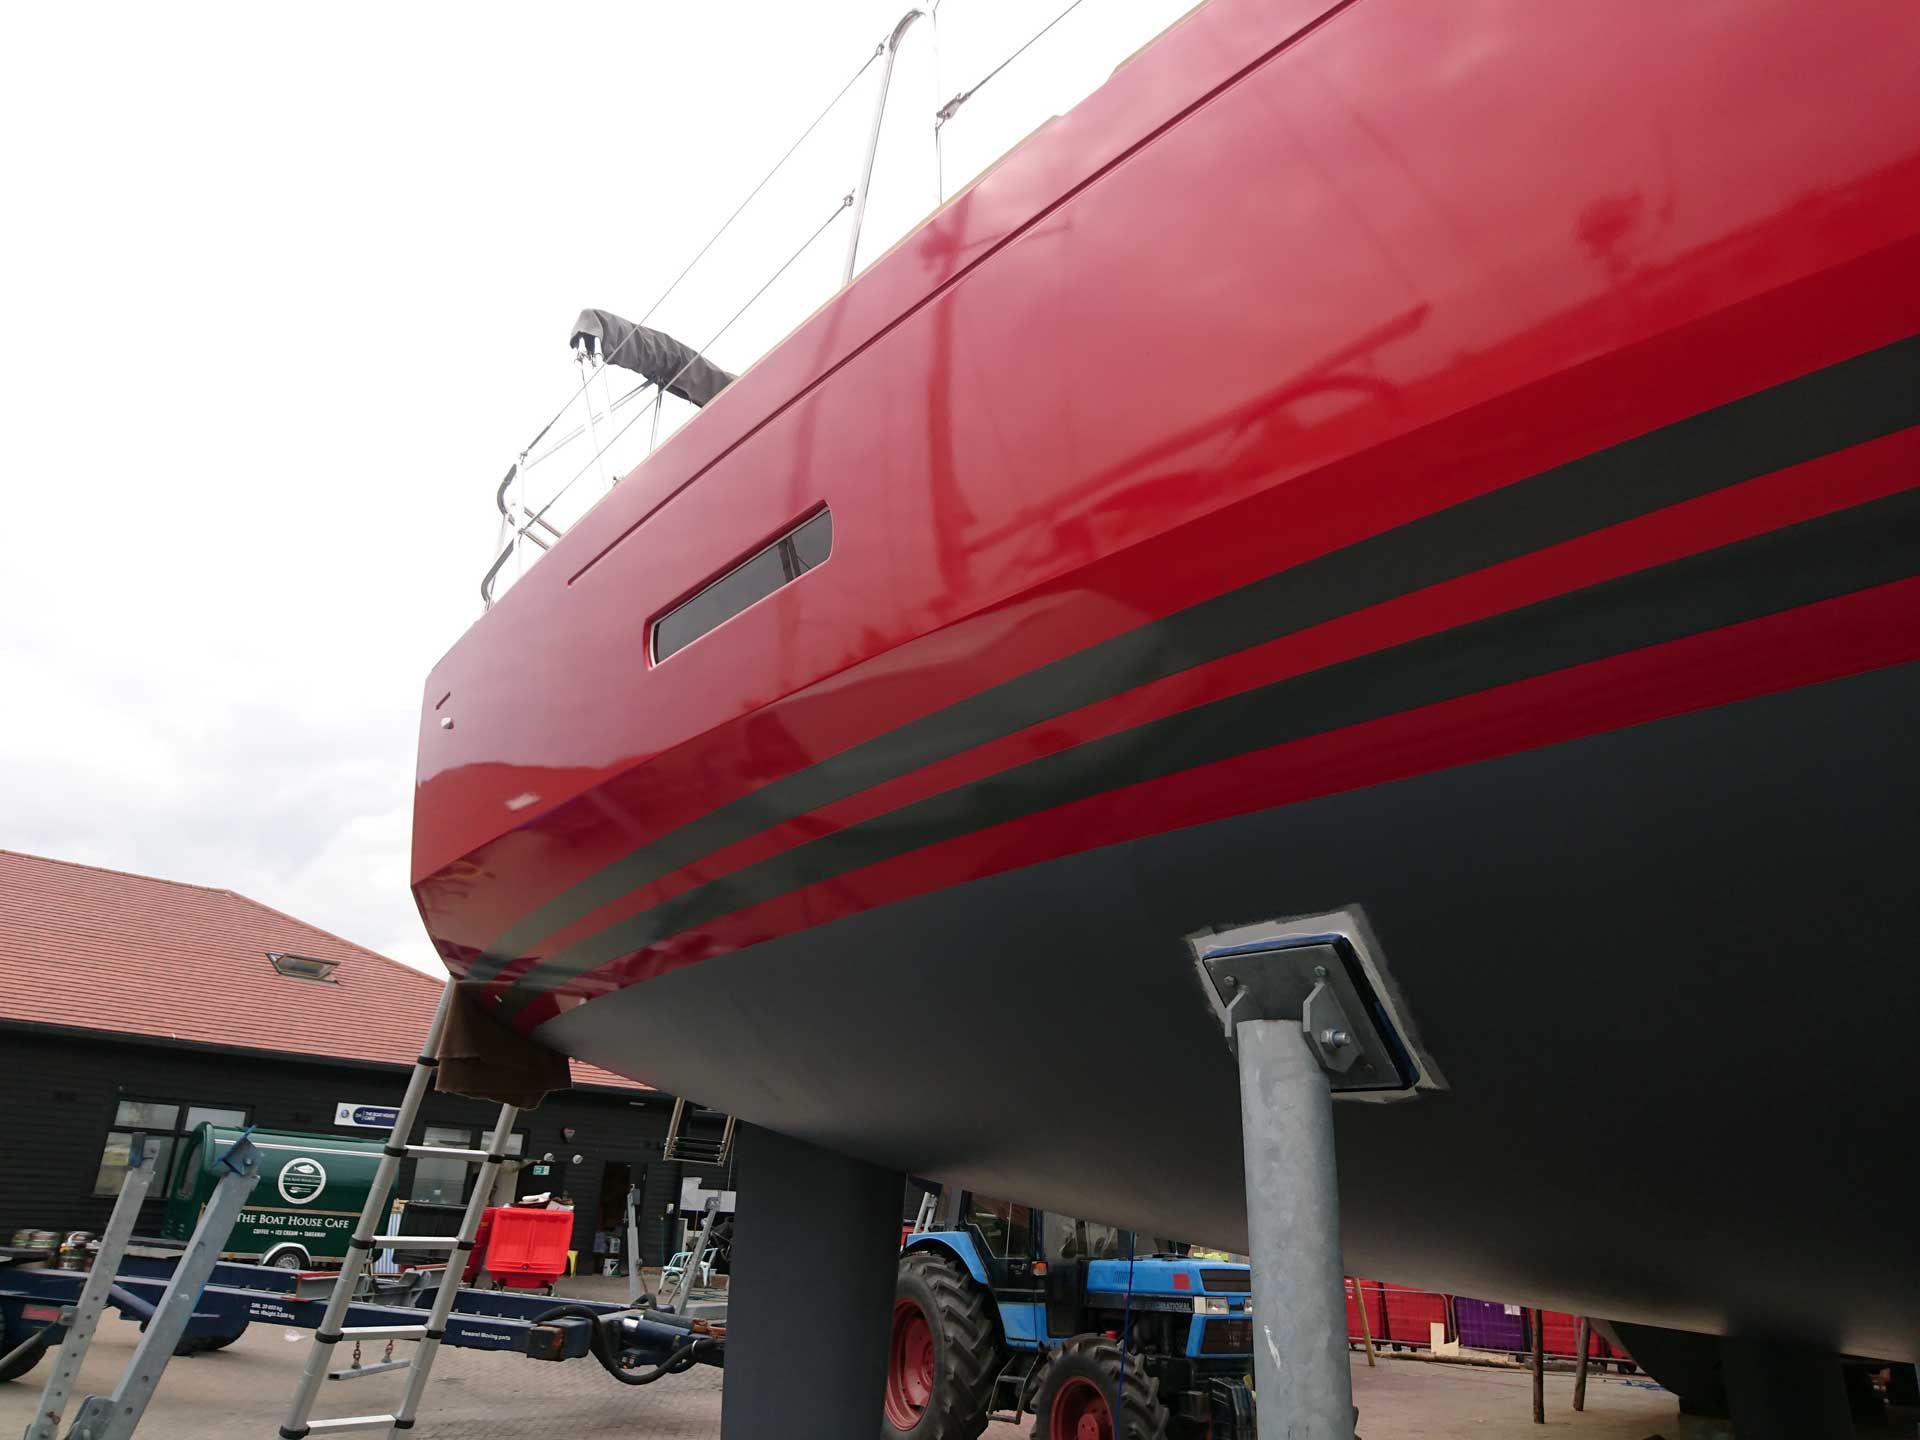 Brand new hull stripes have been applied to this Jeanneau here in the Solent.